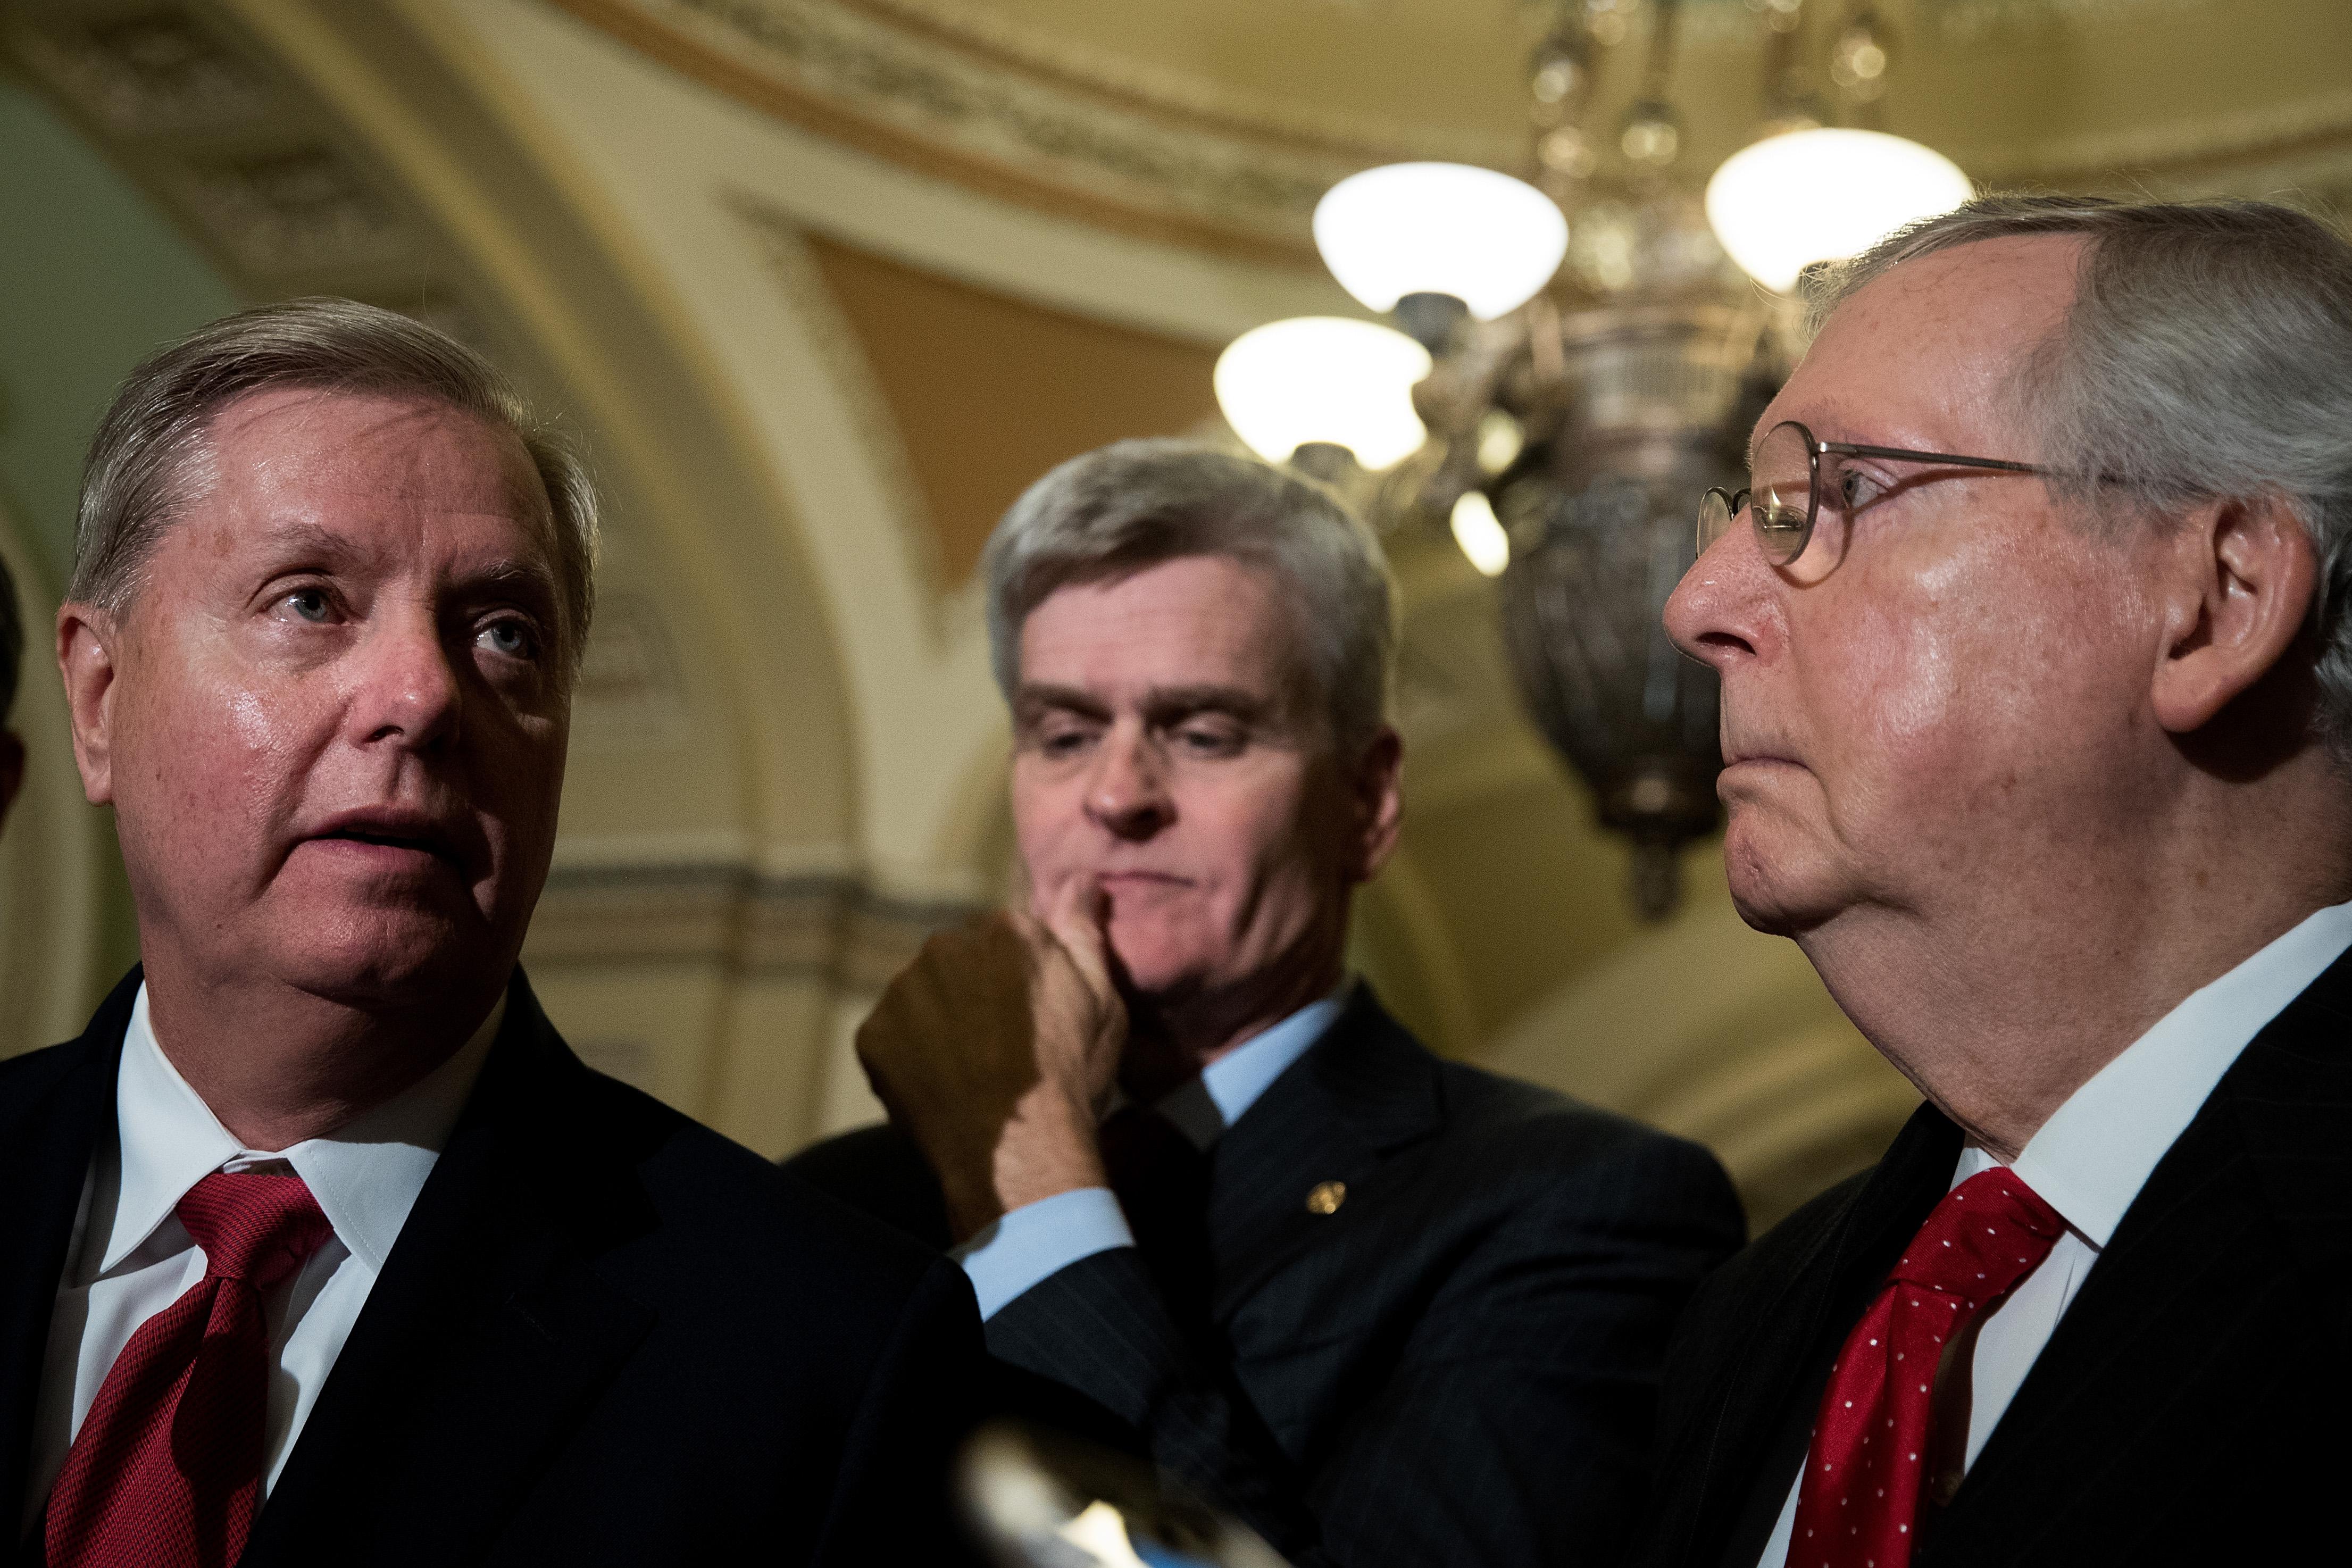 Lindsey Graham (R-SC), Bill Cassidy (R-LA) and Majority Leader Mitch McConnell (R-KY) take questions from reporters during a news conference following their weekly policy luncheon, September 26, 2017 in Washington, D.C. 